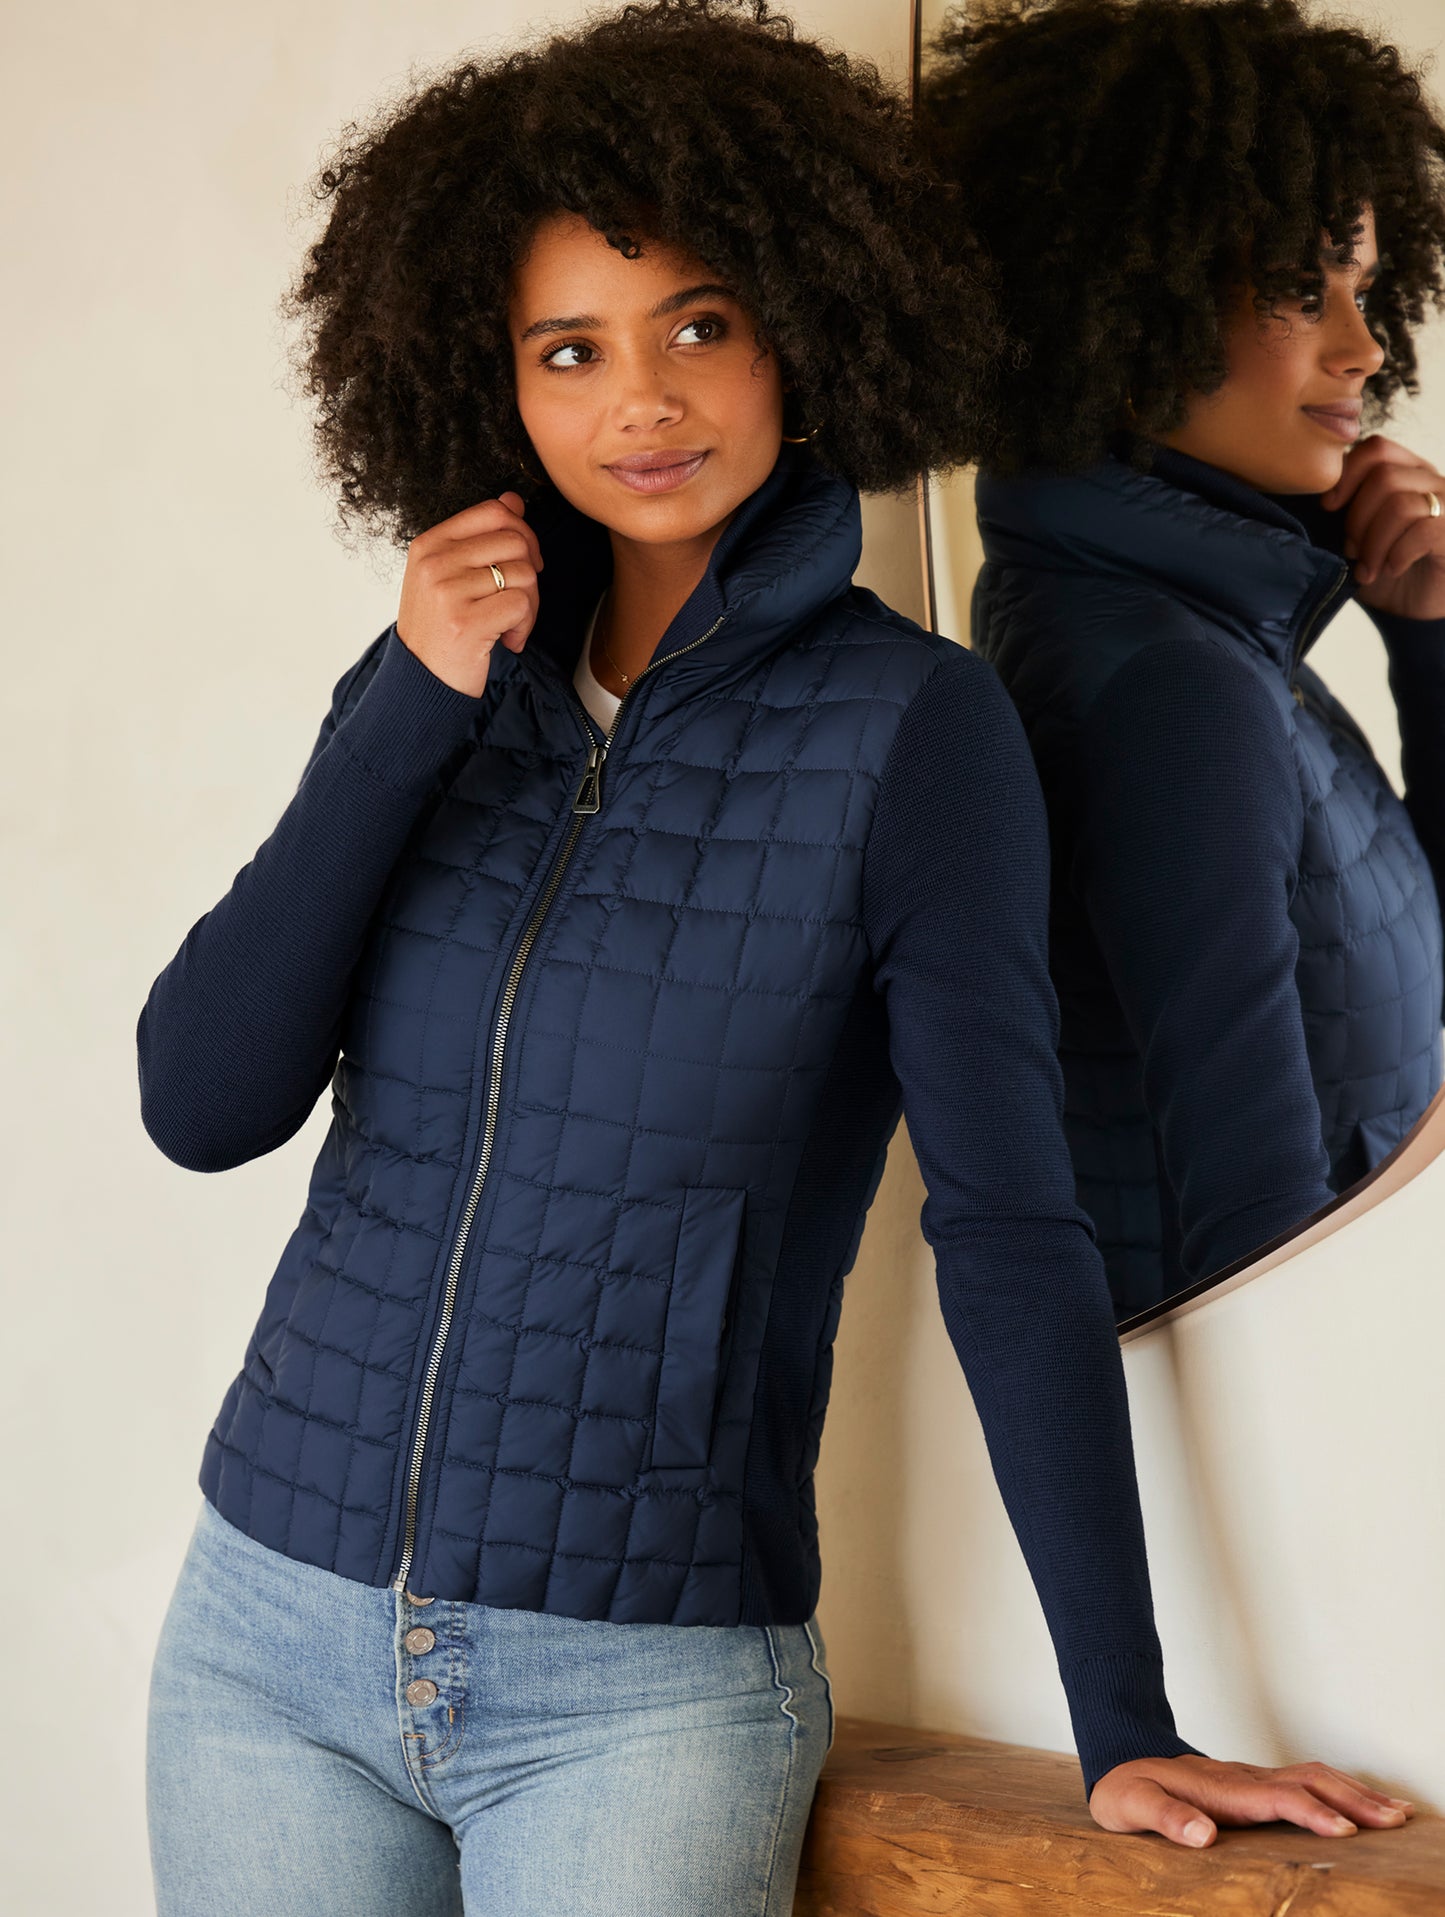 woman wearing quilted blue full-zip sweater